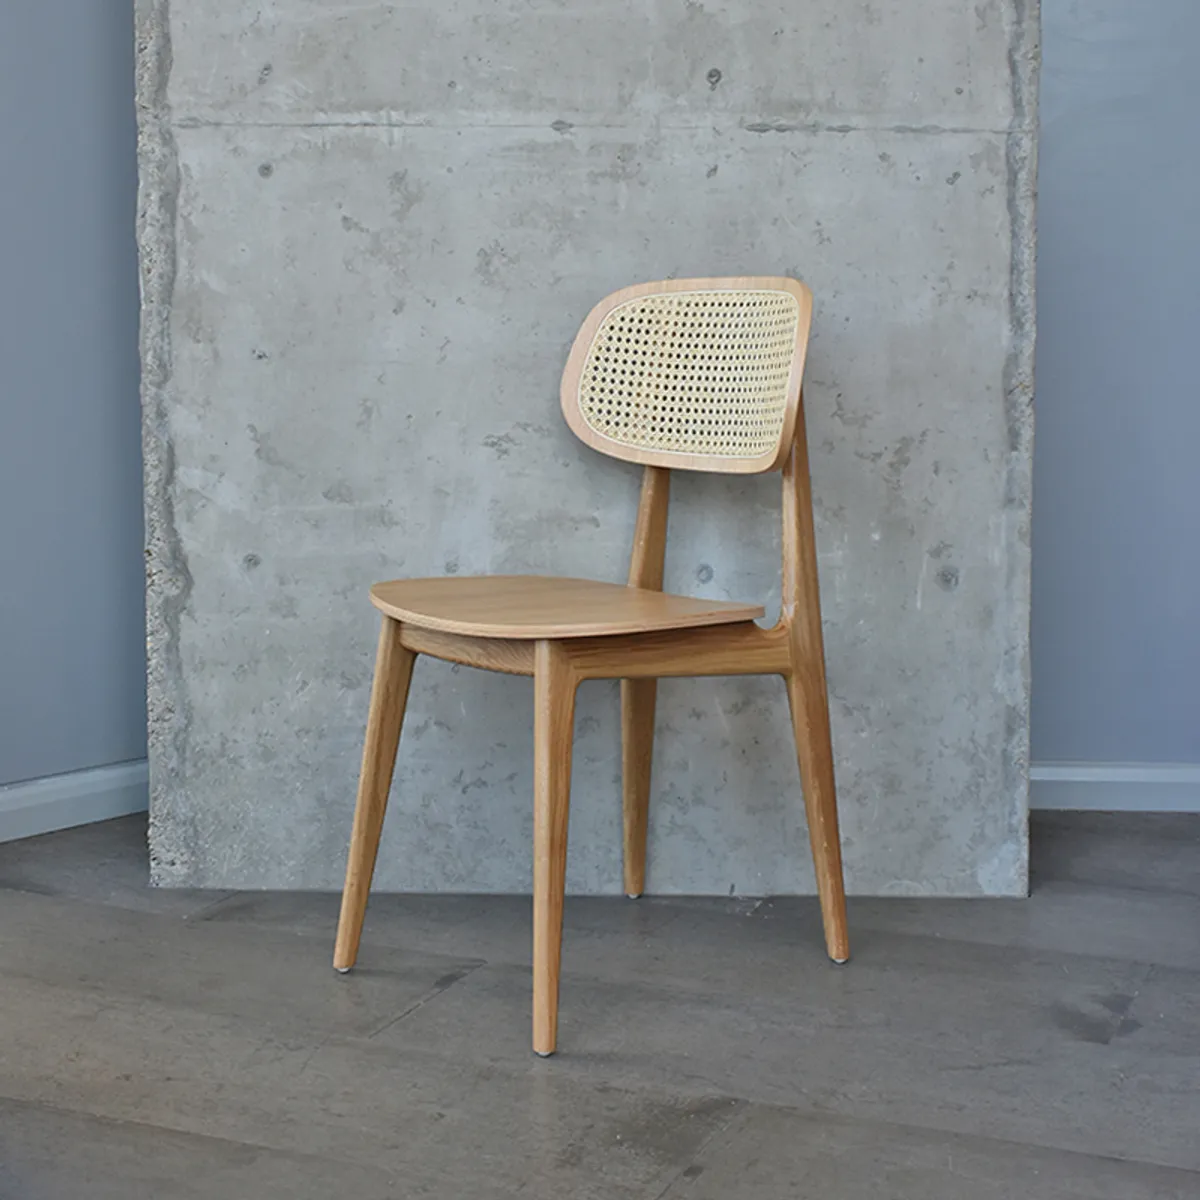 Moby Cane Chair New Furniture From Milan 2019 By Inside Out Contracts 030